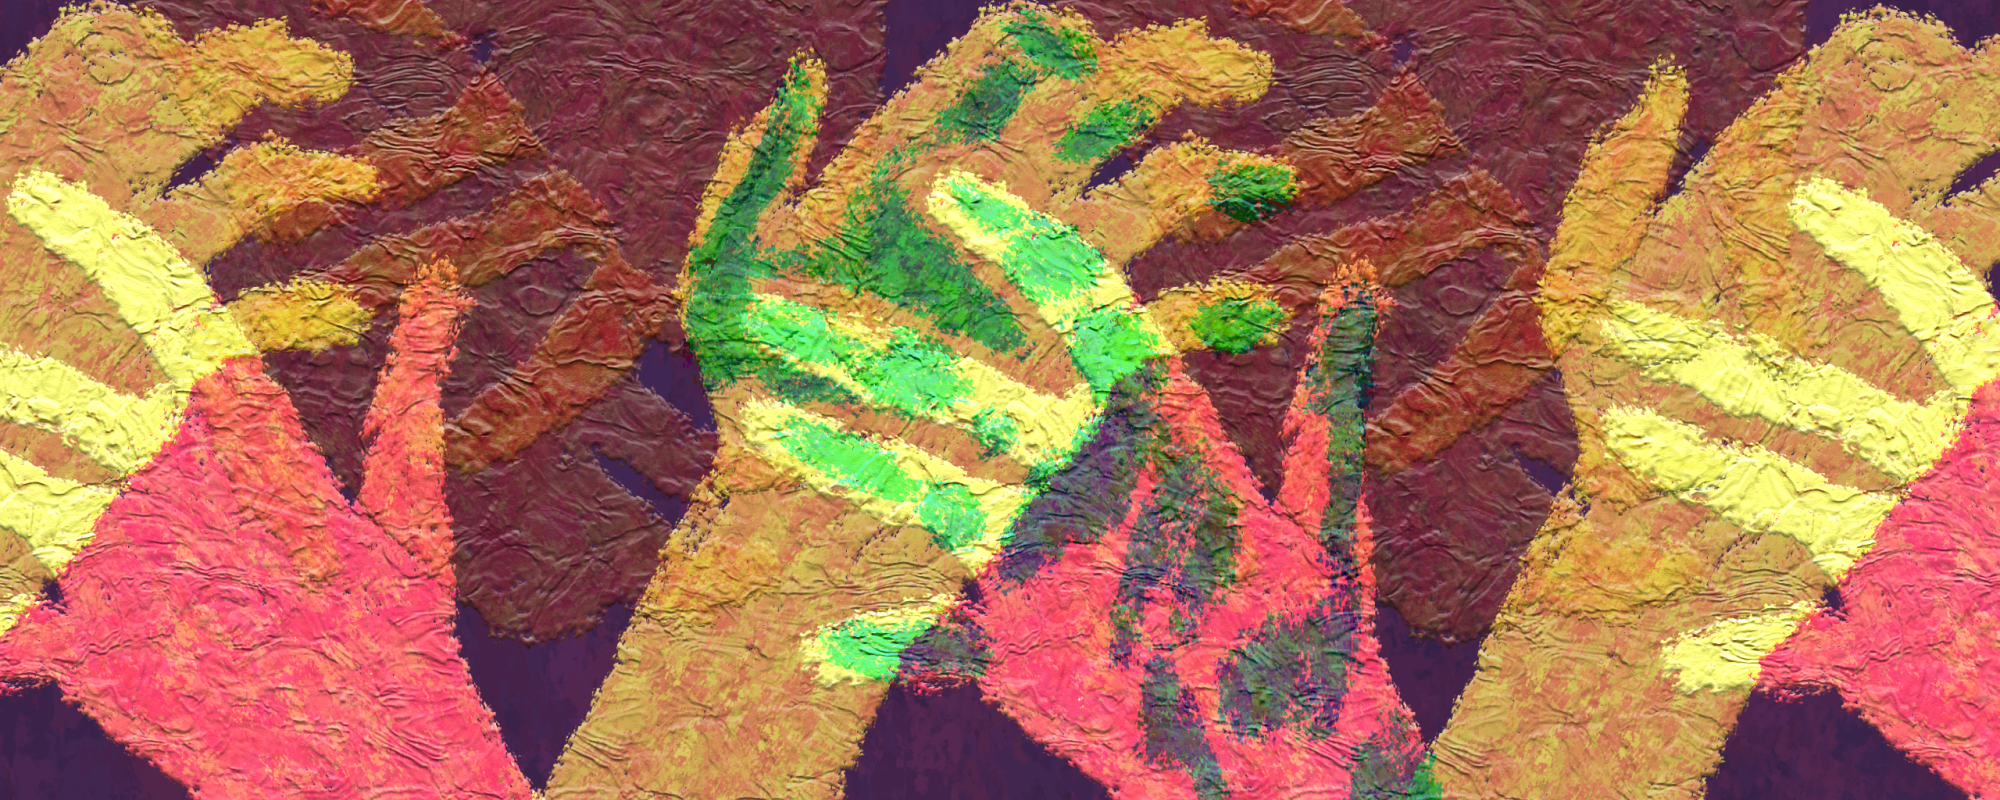 multicolored hands holding one another